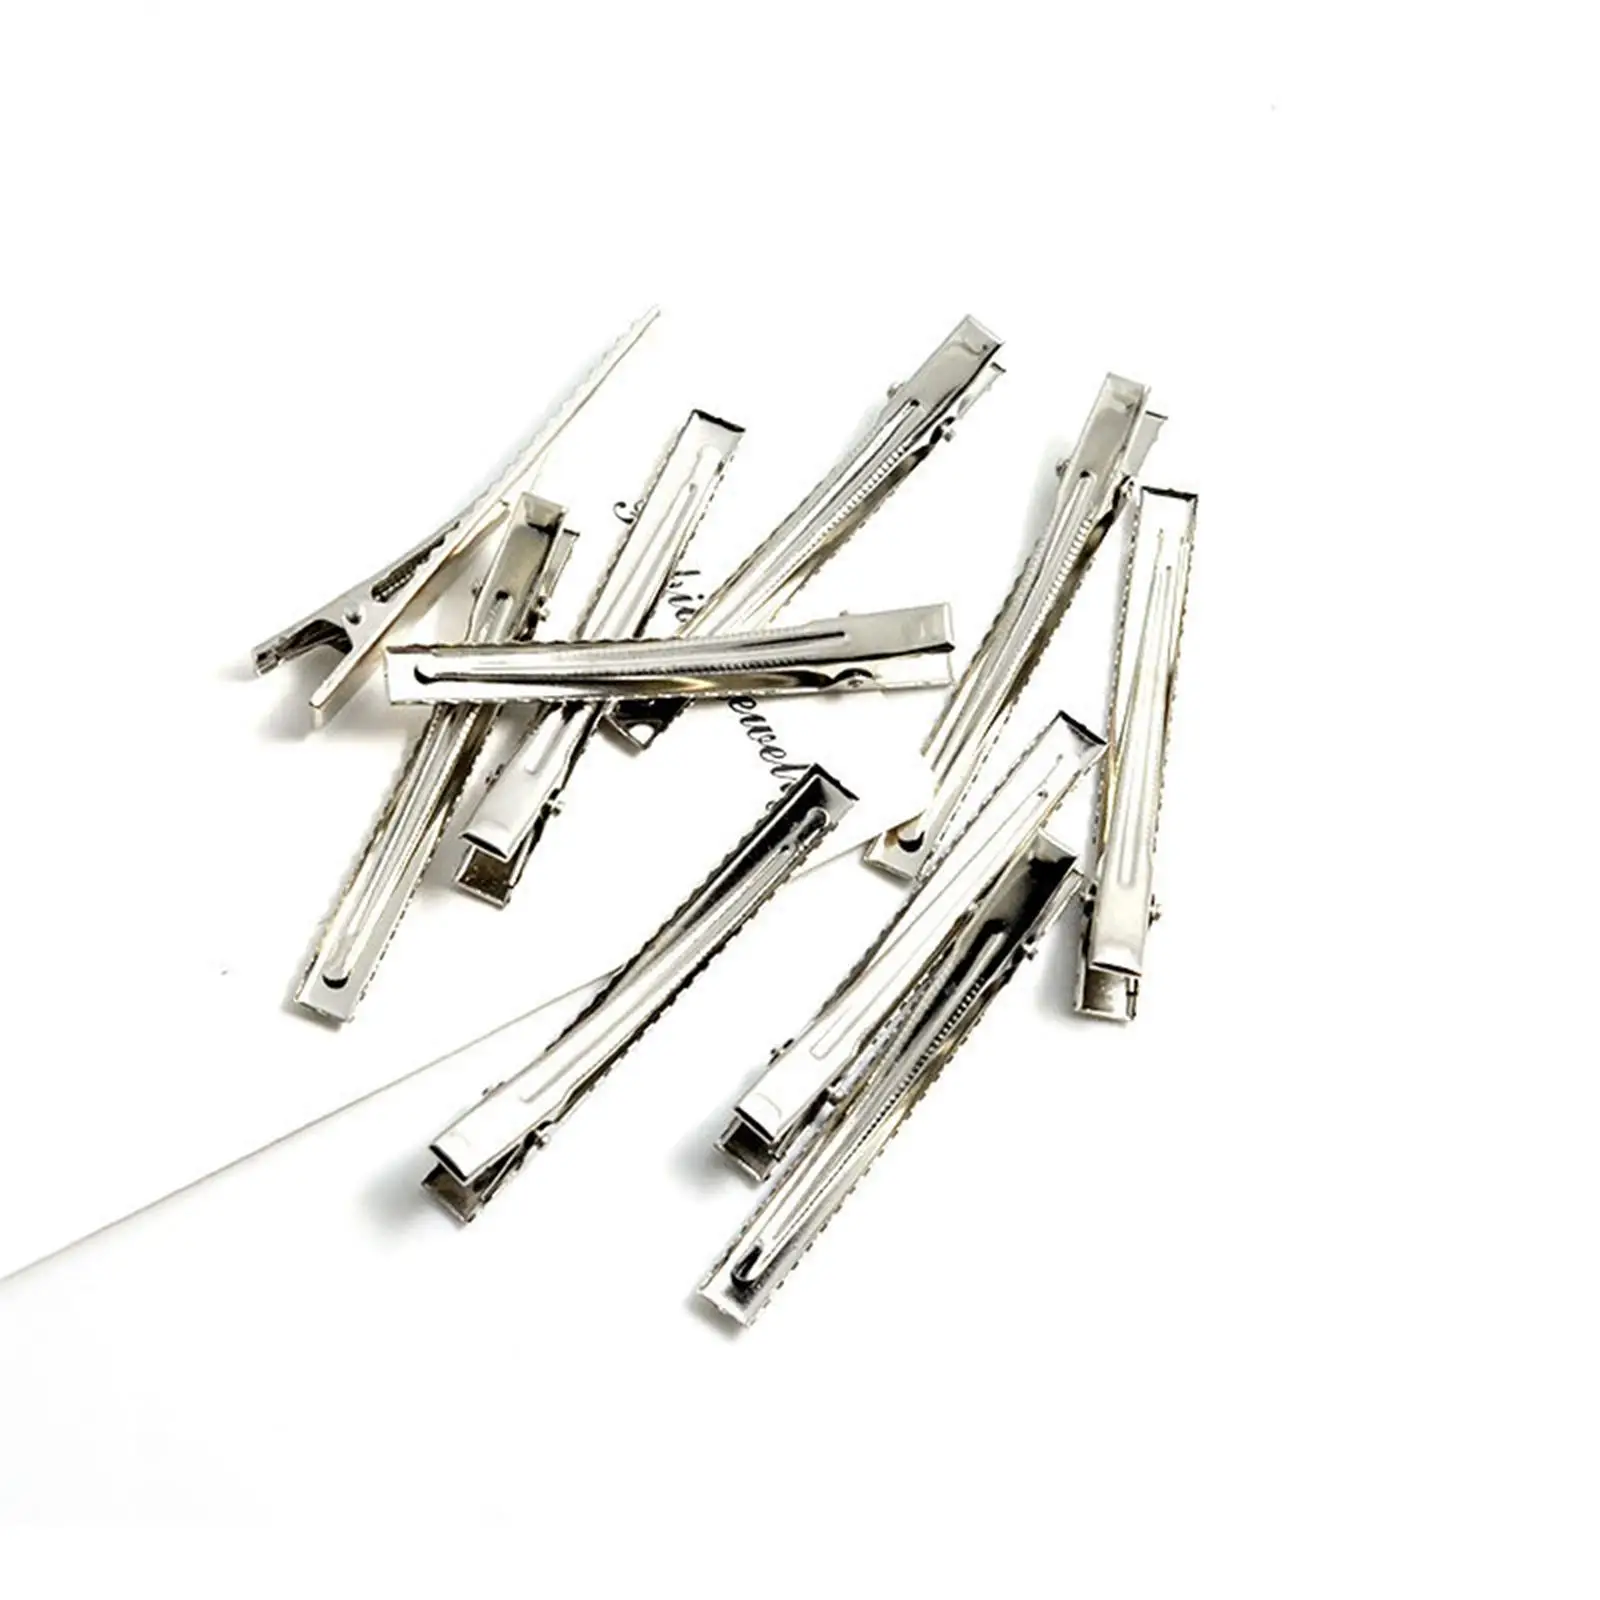 10pcs Hair Clips 75mm Single Prong Alligator Hairpin Teeth Blank Setting Accessories for Jewelry Making DIY Hair Clip